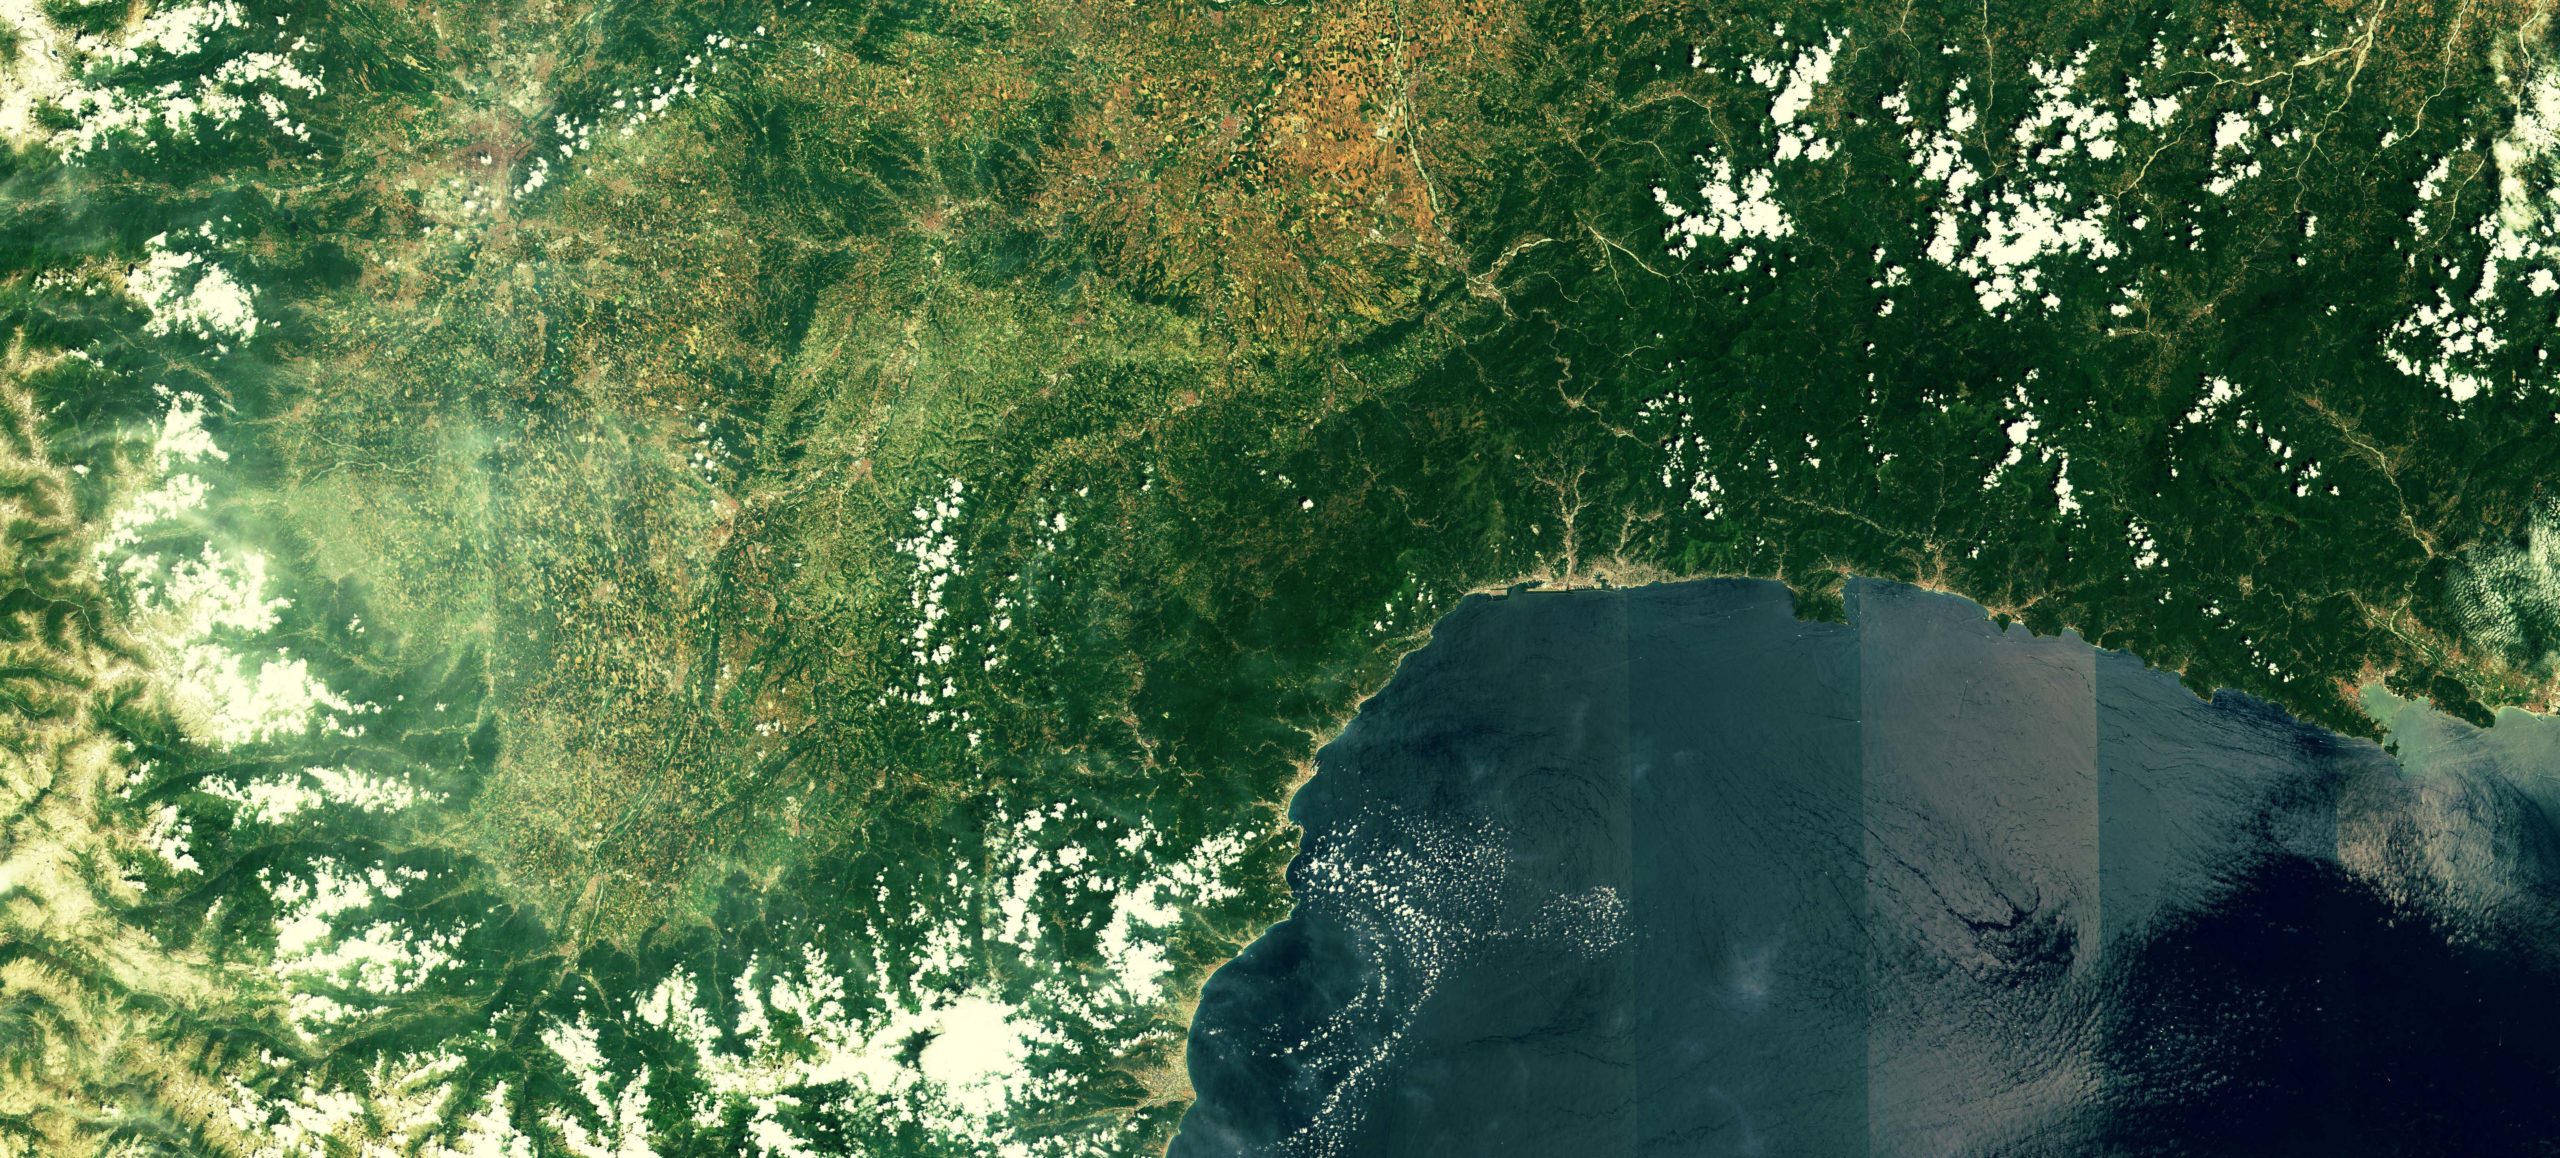 These Are The First Images From ESA’s Sentinel-2A Satellite